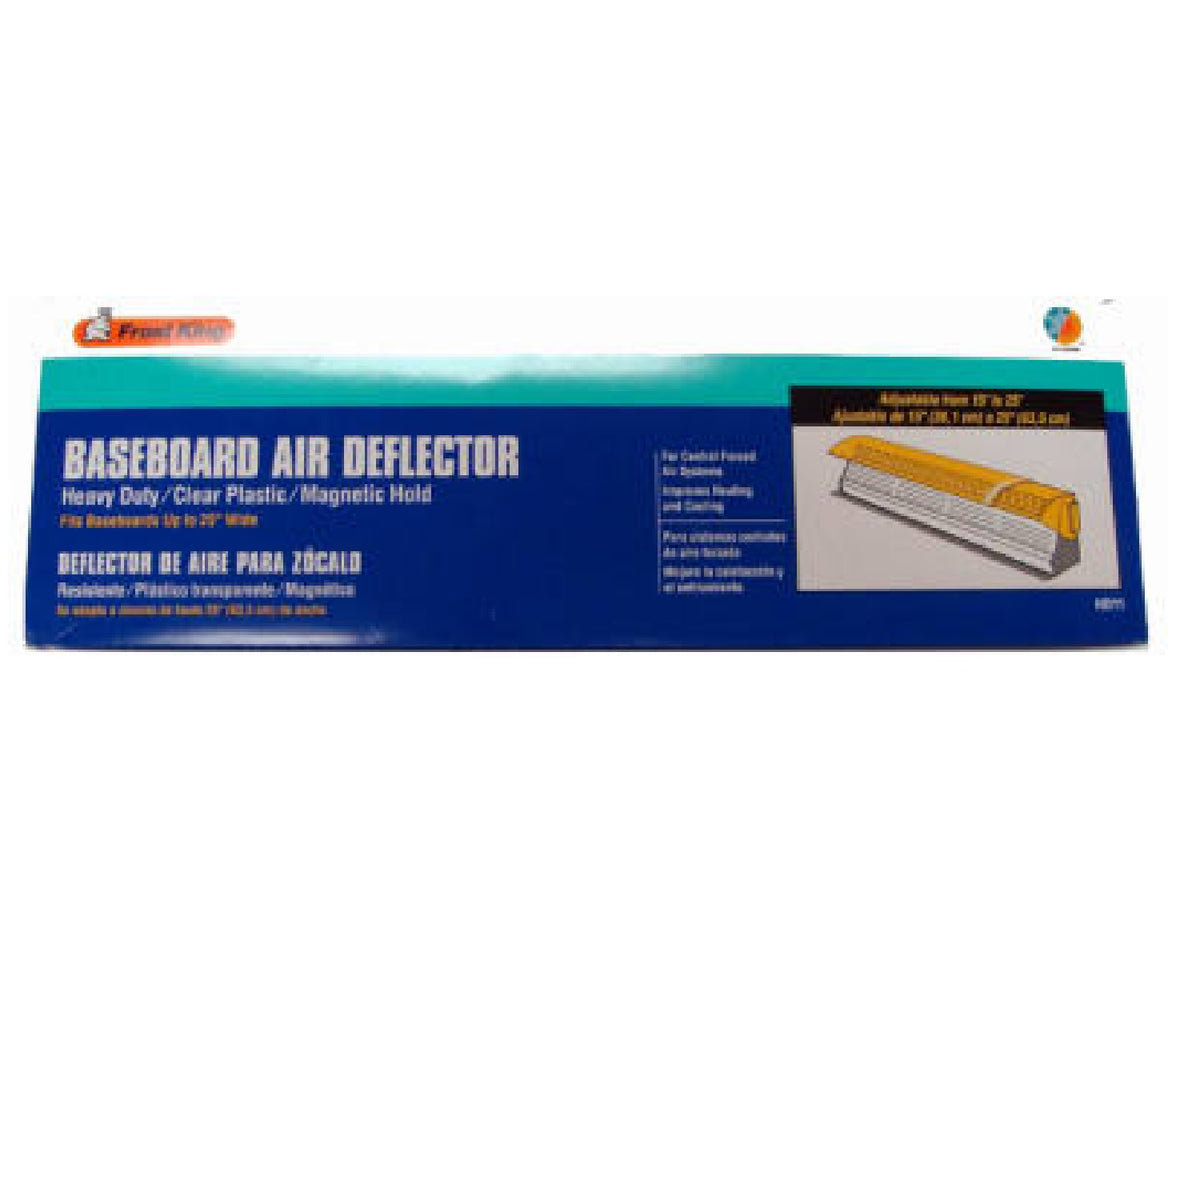 Frost King® HD11 Heat & Air Deflector for Baseboard Register, Expands 15" - 24"